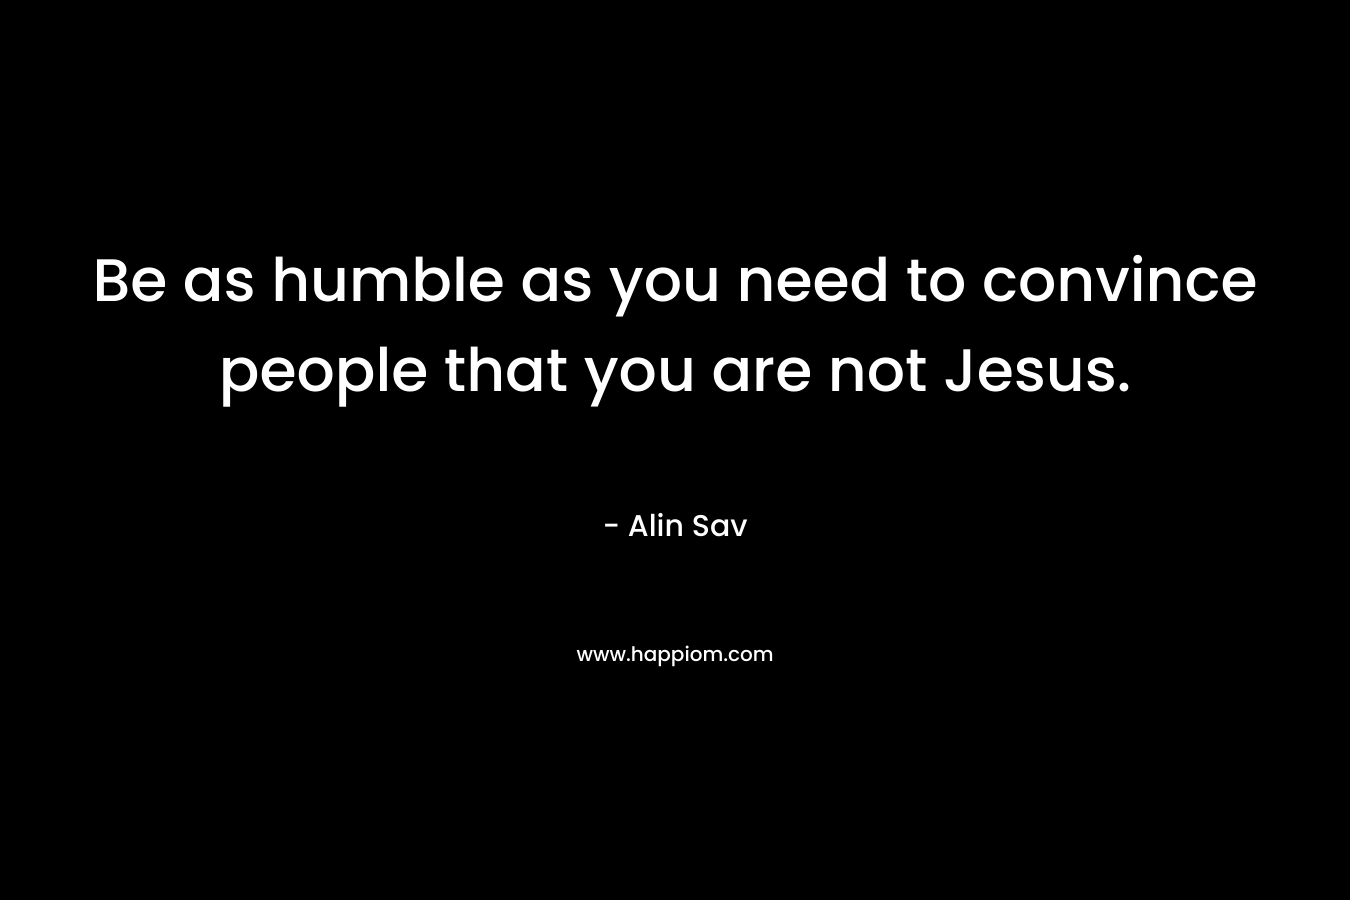 Be as humble as you need to convince people that you are not Jesus.